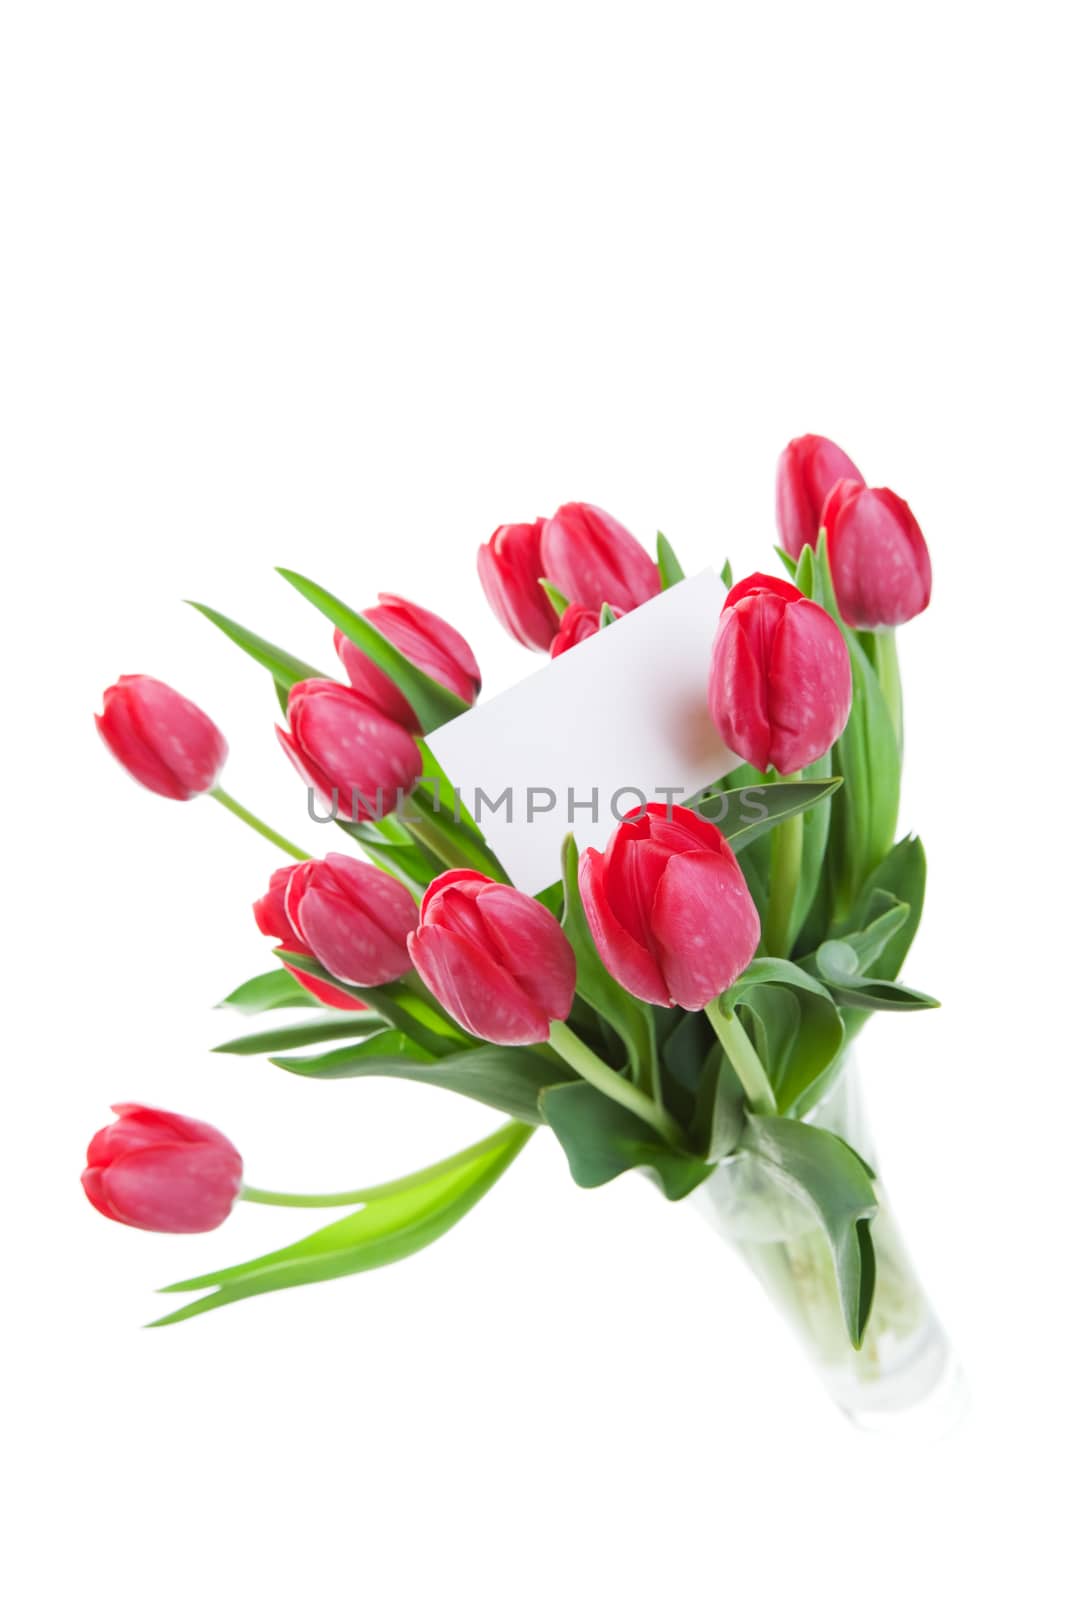 Fresh, rose red tulips in a vase with blank note card.  Shallow depth of field.  Focus on front tulip.  Shot on white background.